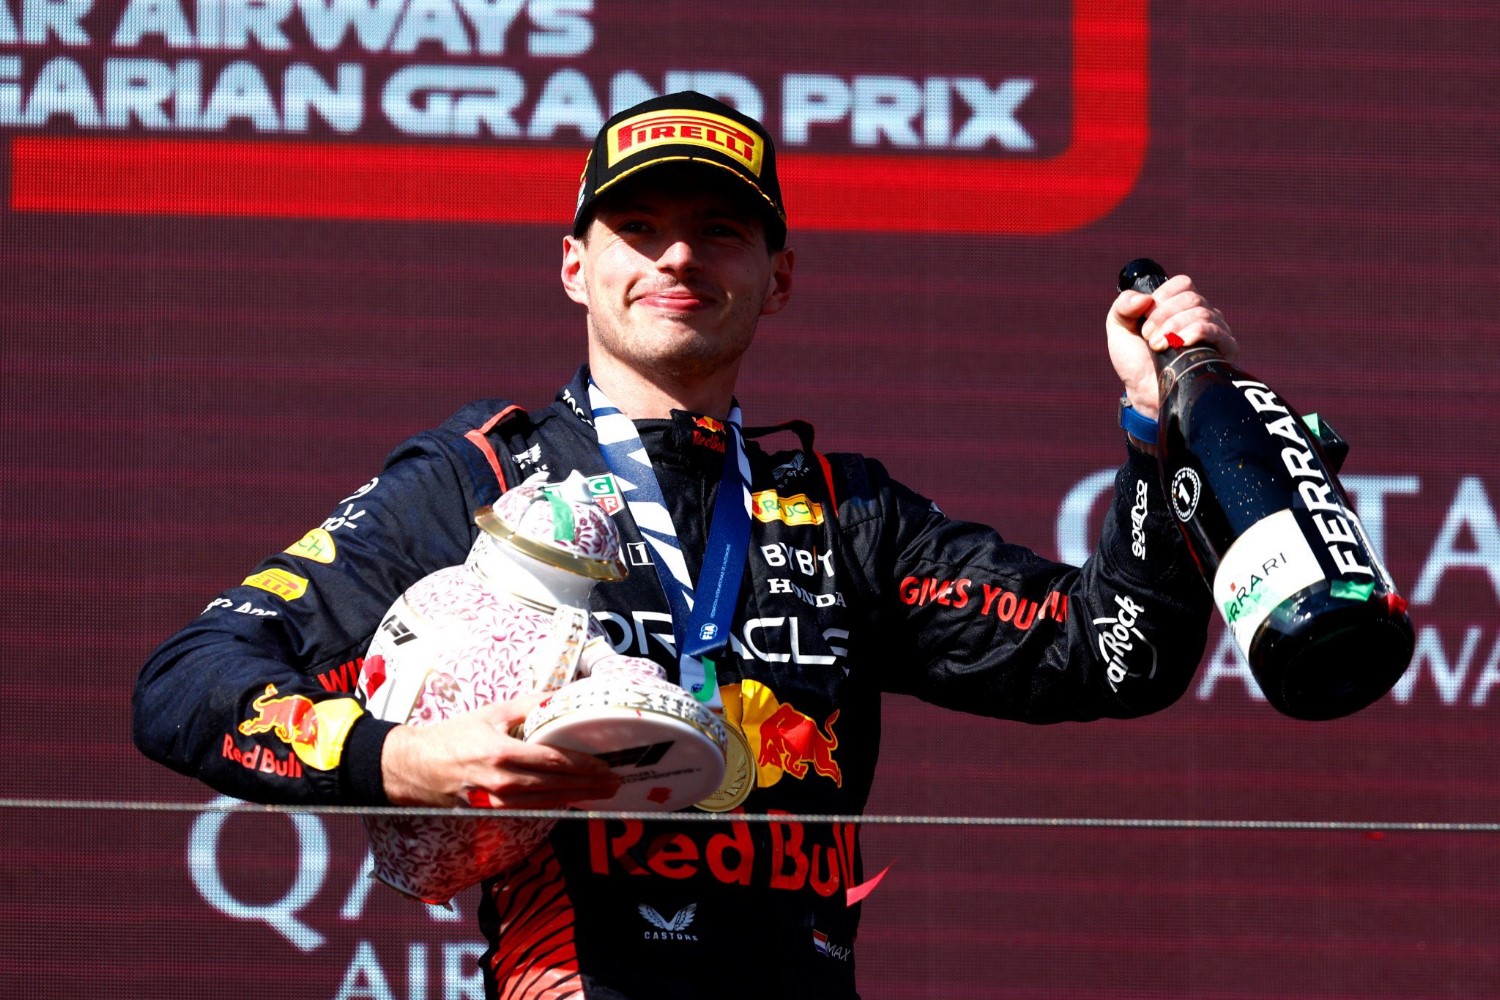 Max Verstappen walks off the Hungarian GP podium with his broken trophy. Verstappen will get Norris back by beating him like a drum on race days